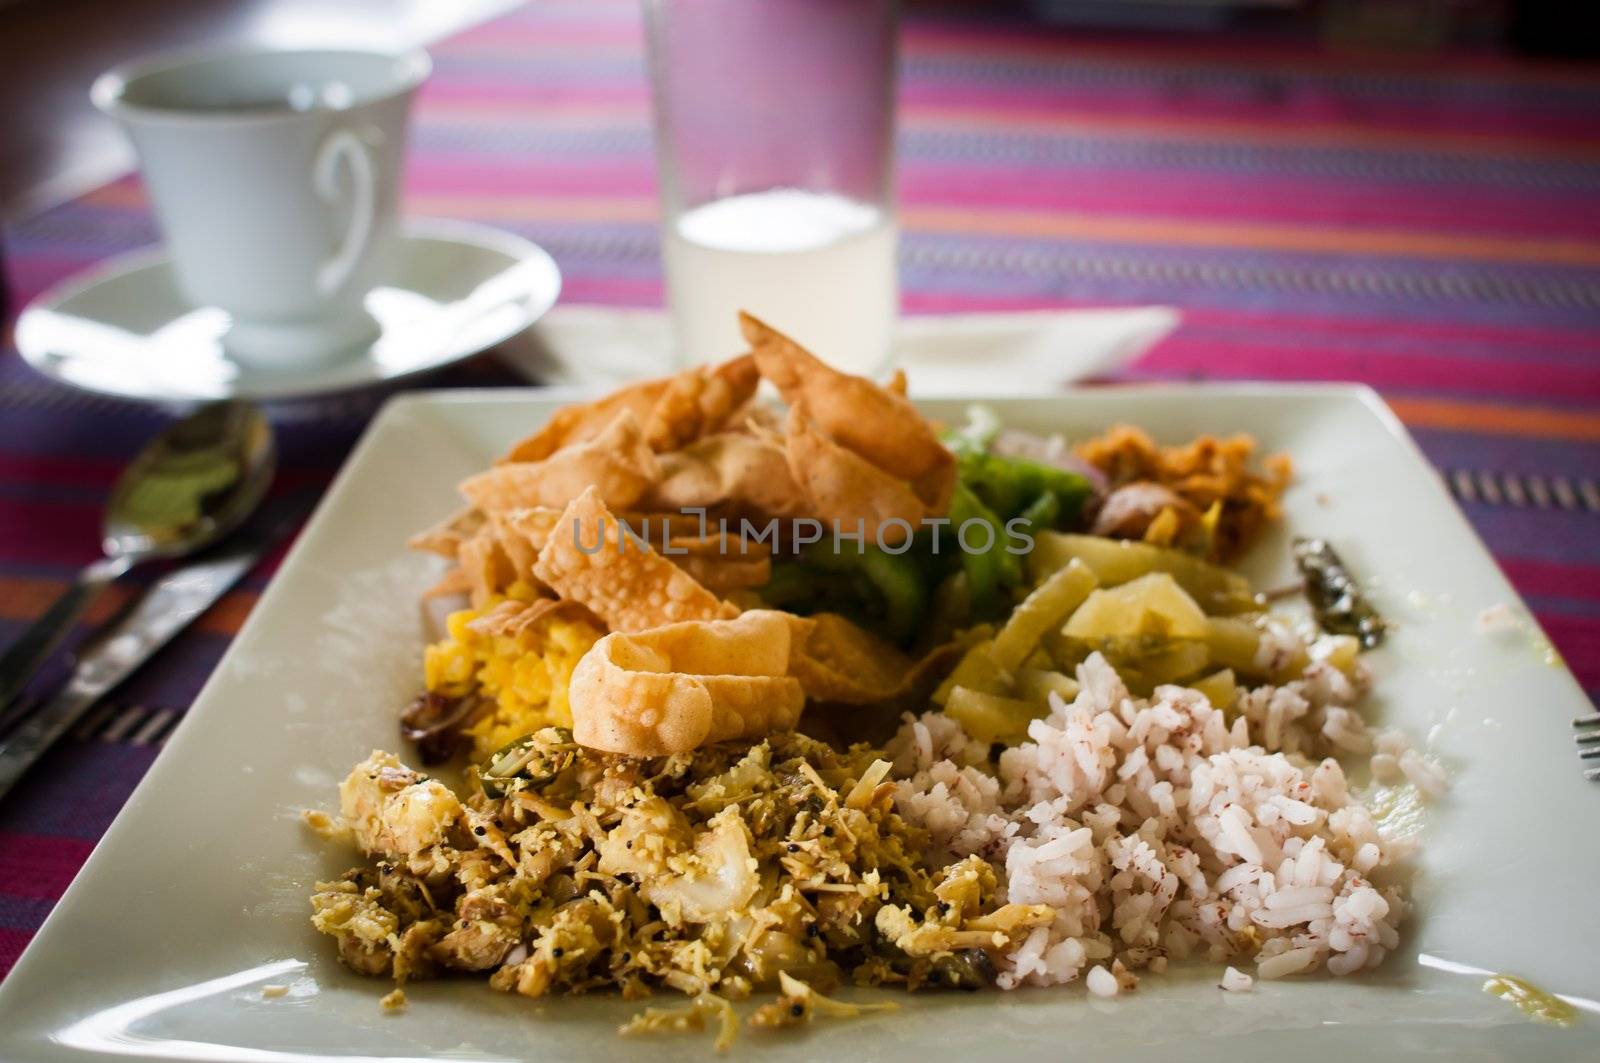 Traditional Sri Lankian food with rice, chicken with coconut, vegetables. Ginger drink and tea.